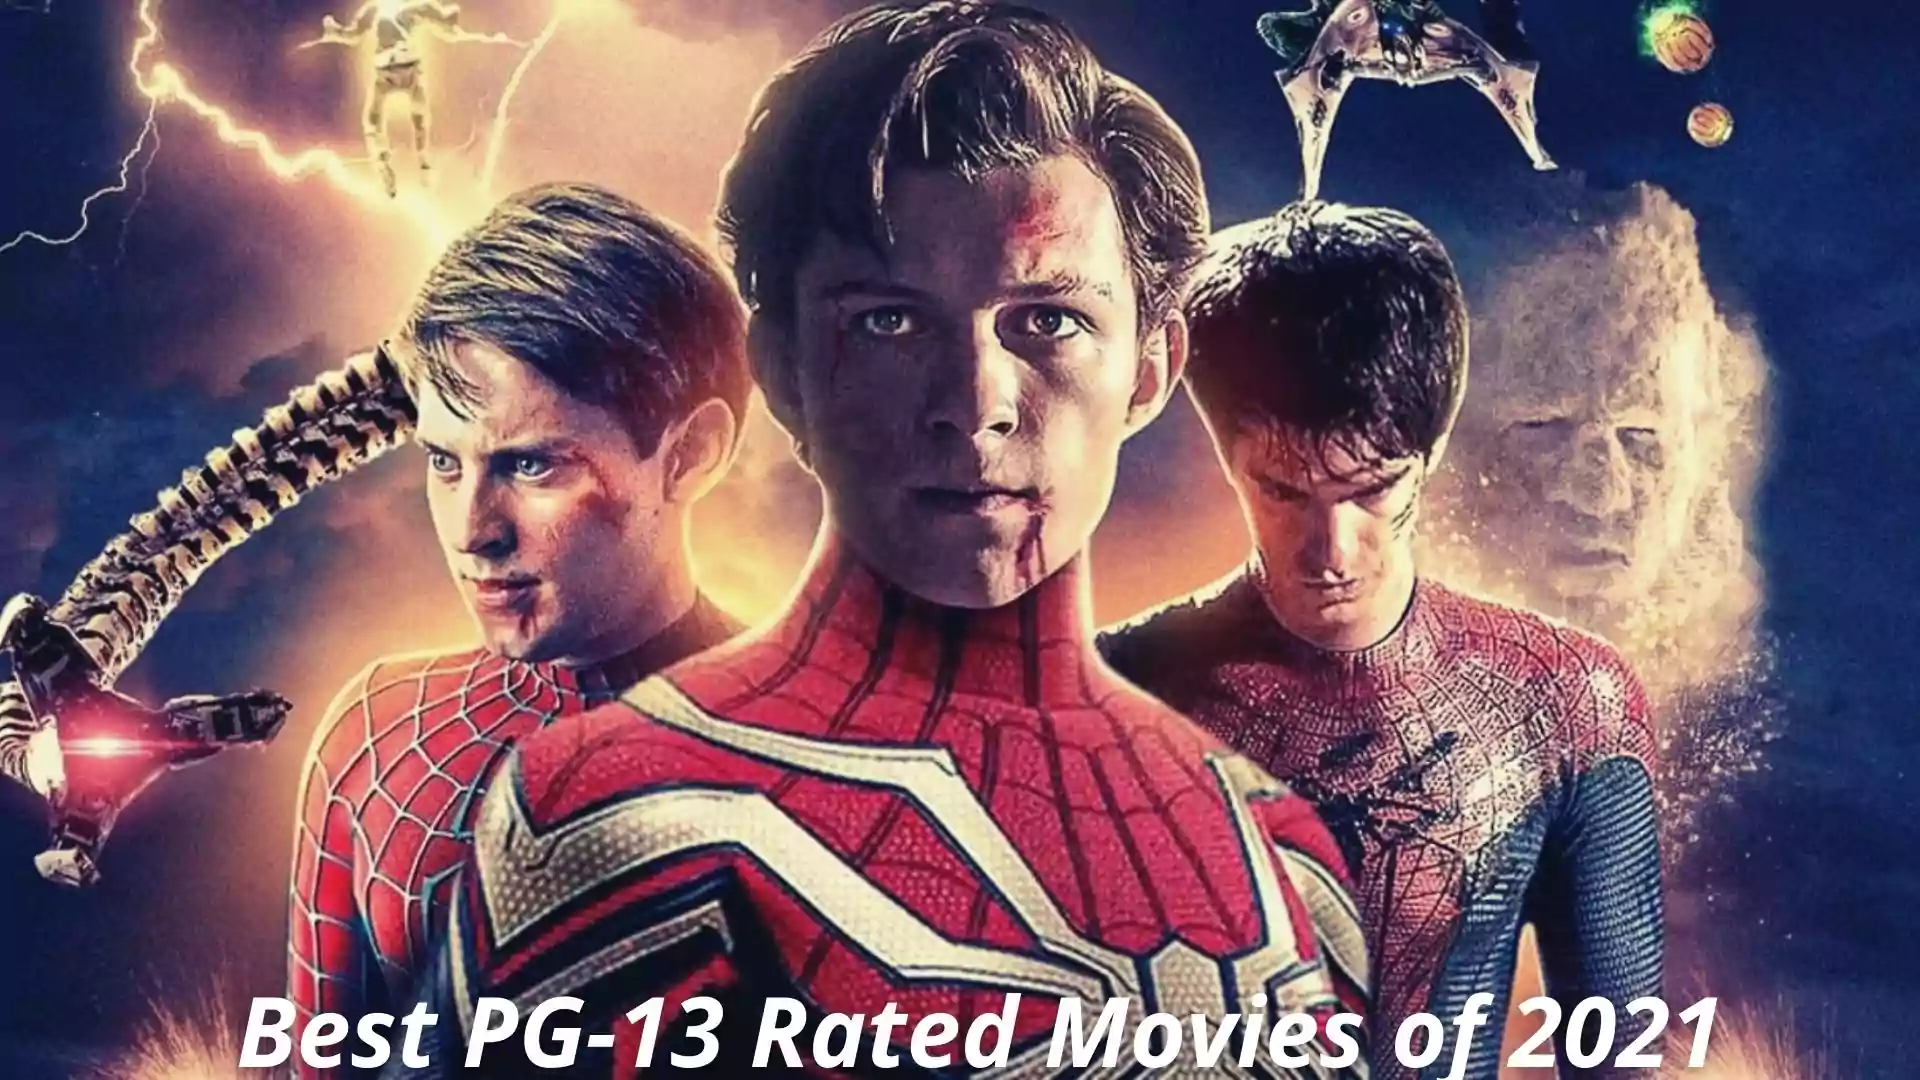 Best PG-13 Rated Movies of 2021